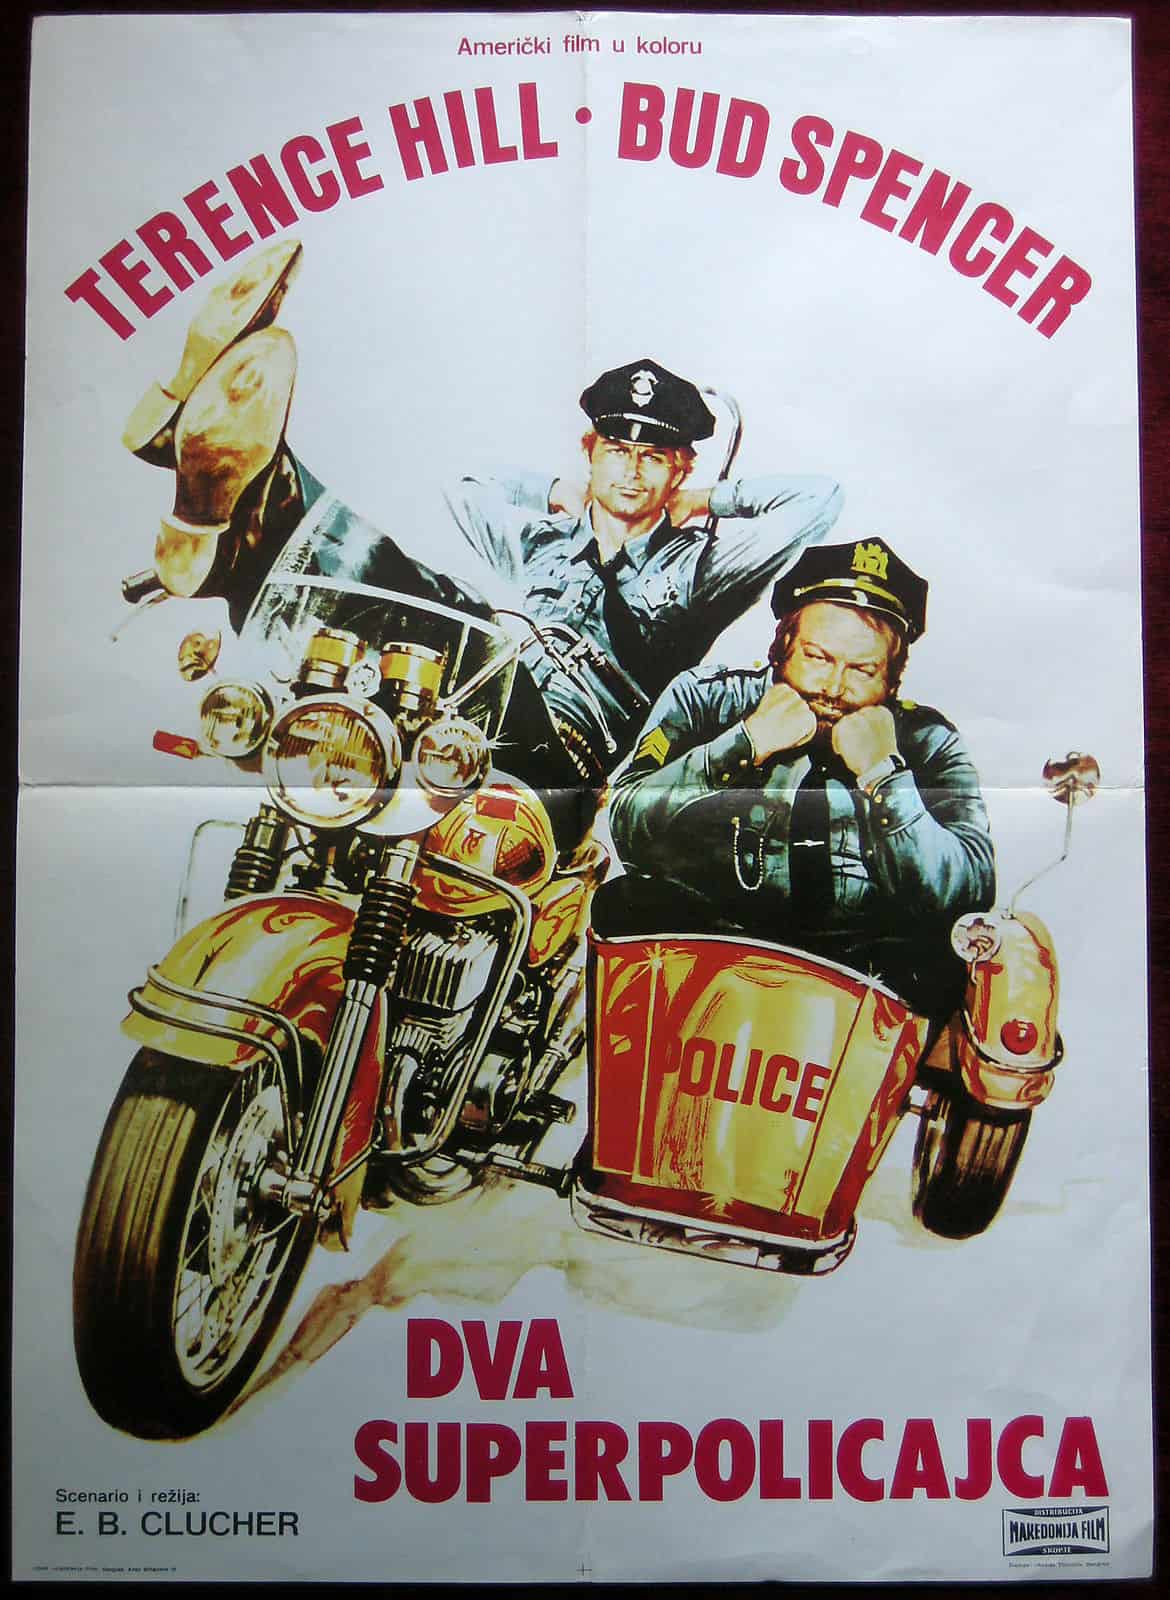 https://sigedon.com/wp-content/uploads/imported/1/1977-Original-American-Movie-Poster-Crime-Busters-Bud-Spencer-Terence-Hill-ITA-181794927851.jpg